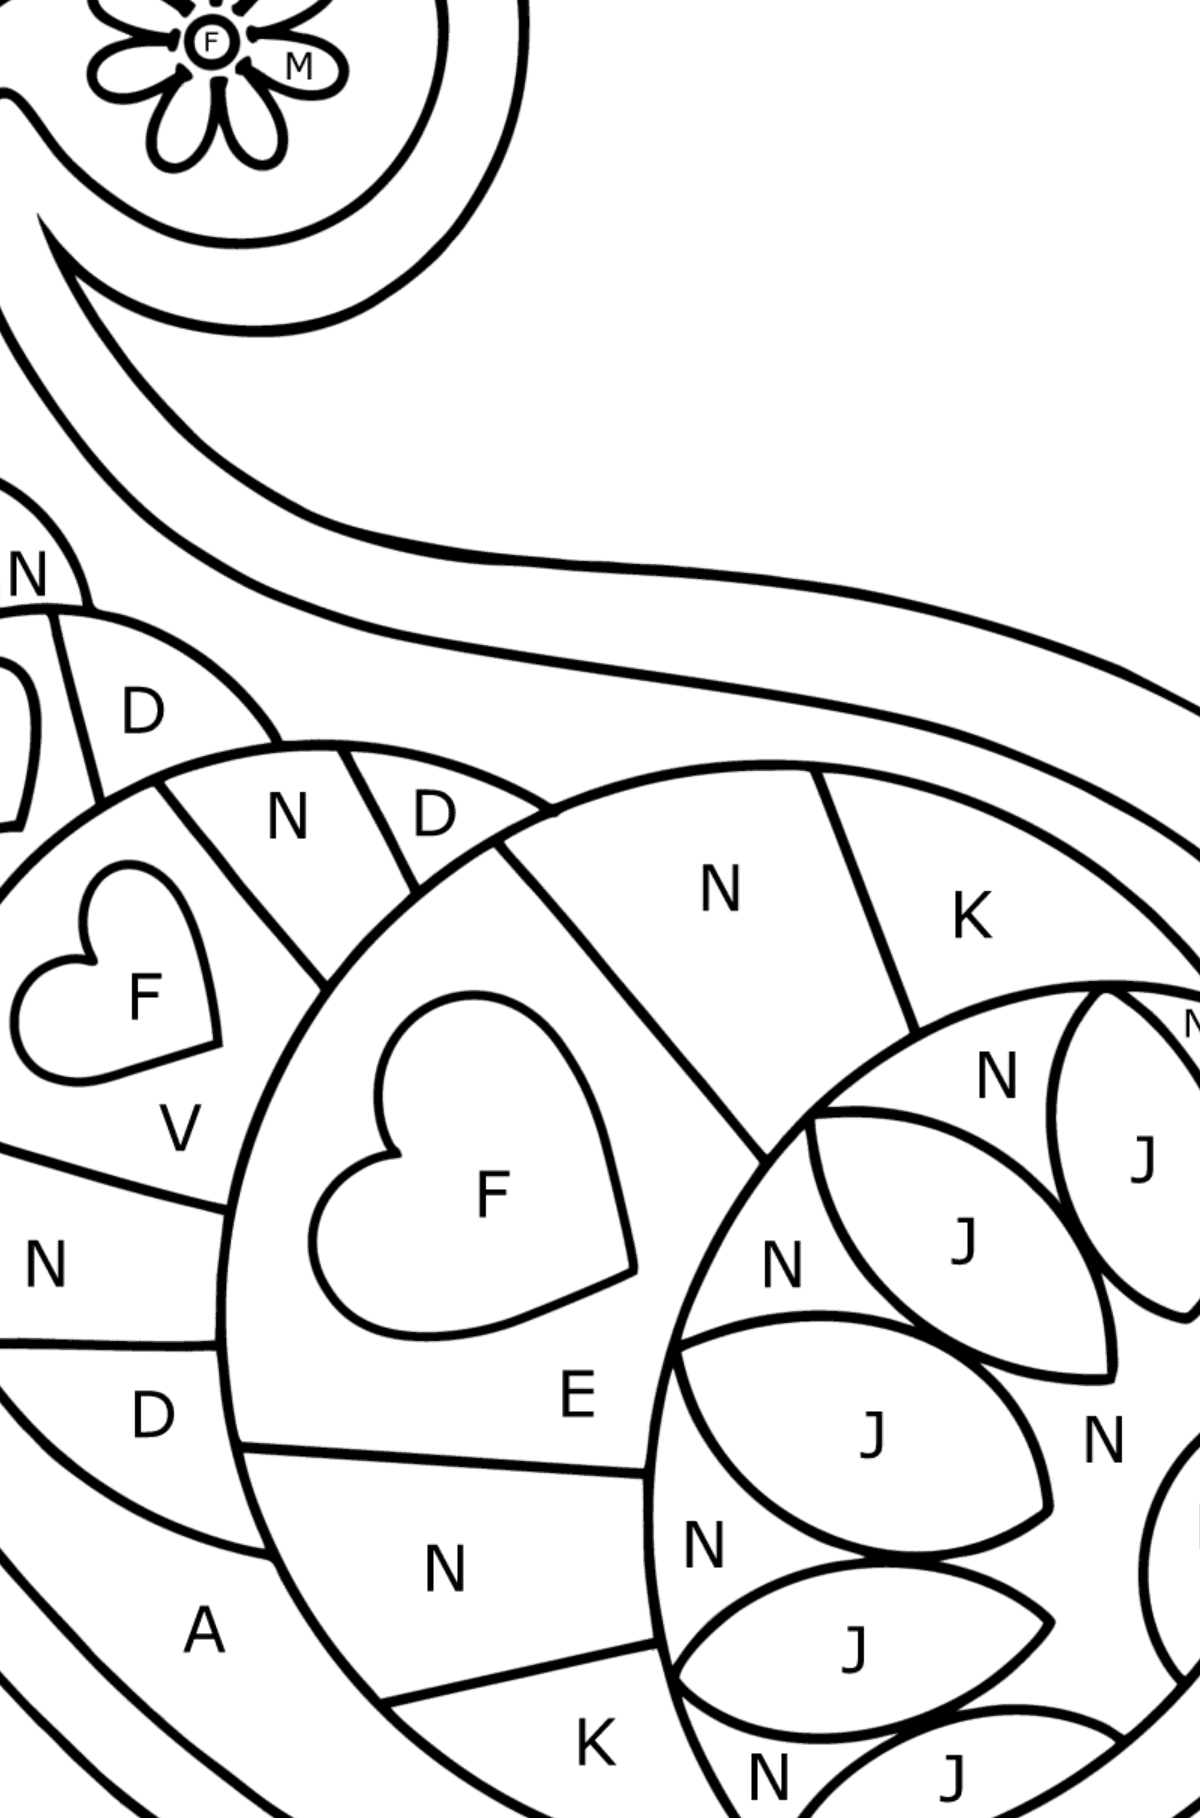 Paisley design coloring page - Coloring by Letters for Kids